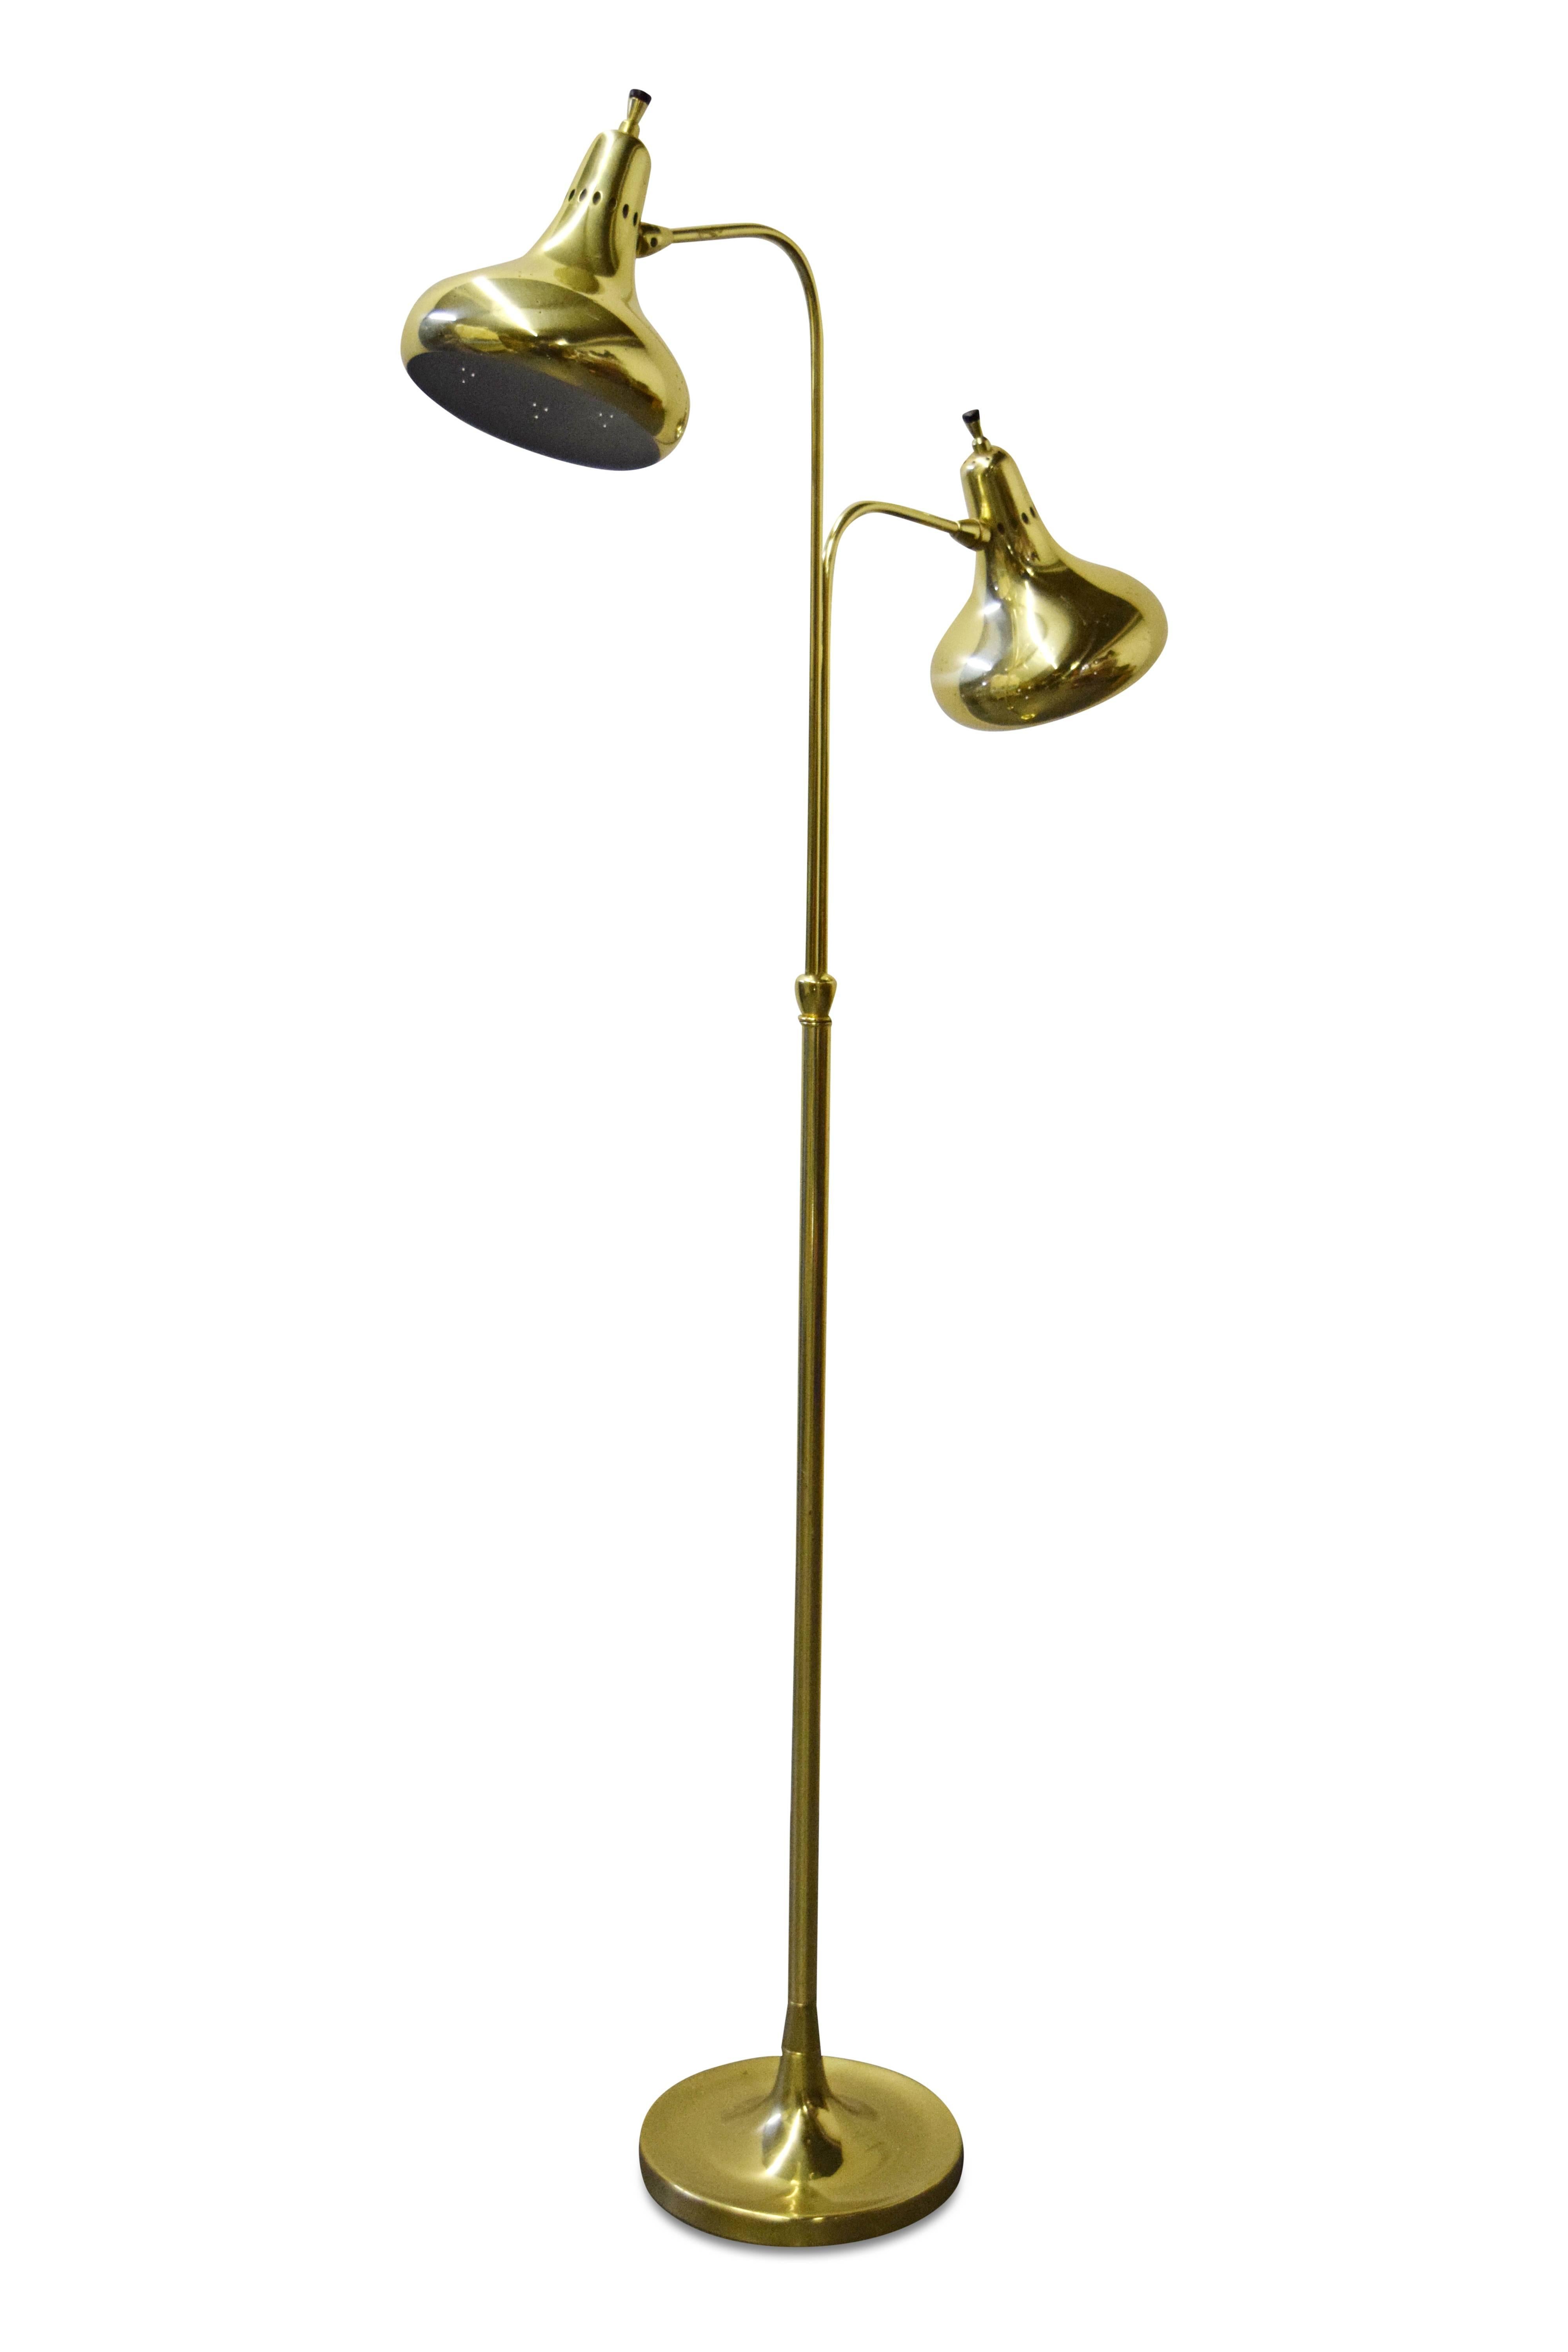 Lightolier Brass Dual Headed Floor Lamp In Excellent Condition For Sale In Middlesex, NJ